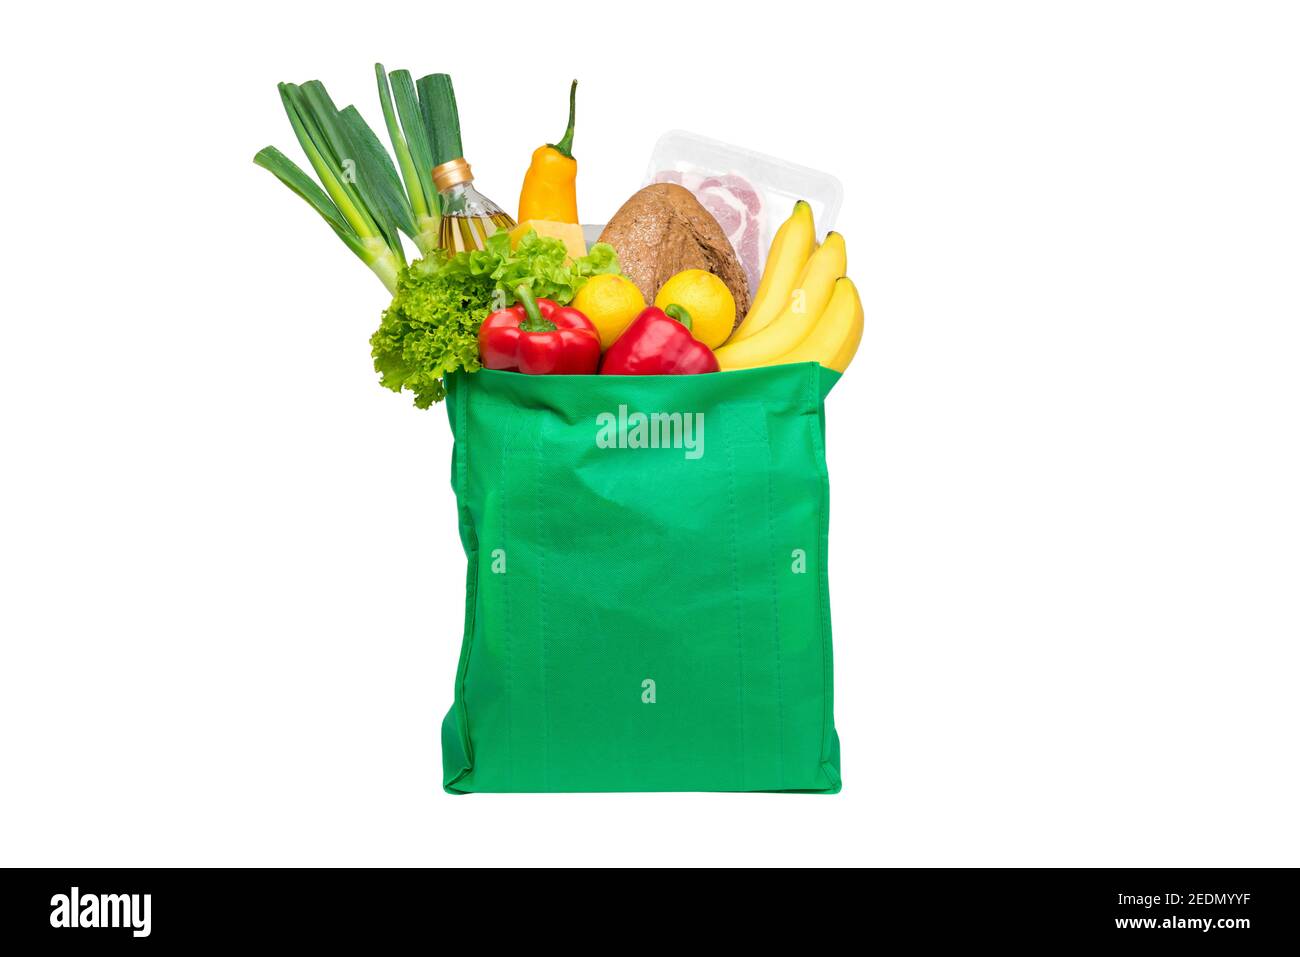 Food and groceries in green eco-friendly reusable shopping bag, isolated on white background Stock Photo